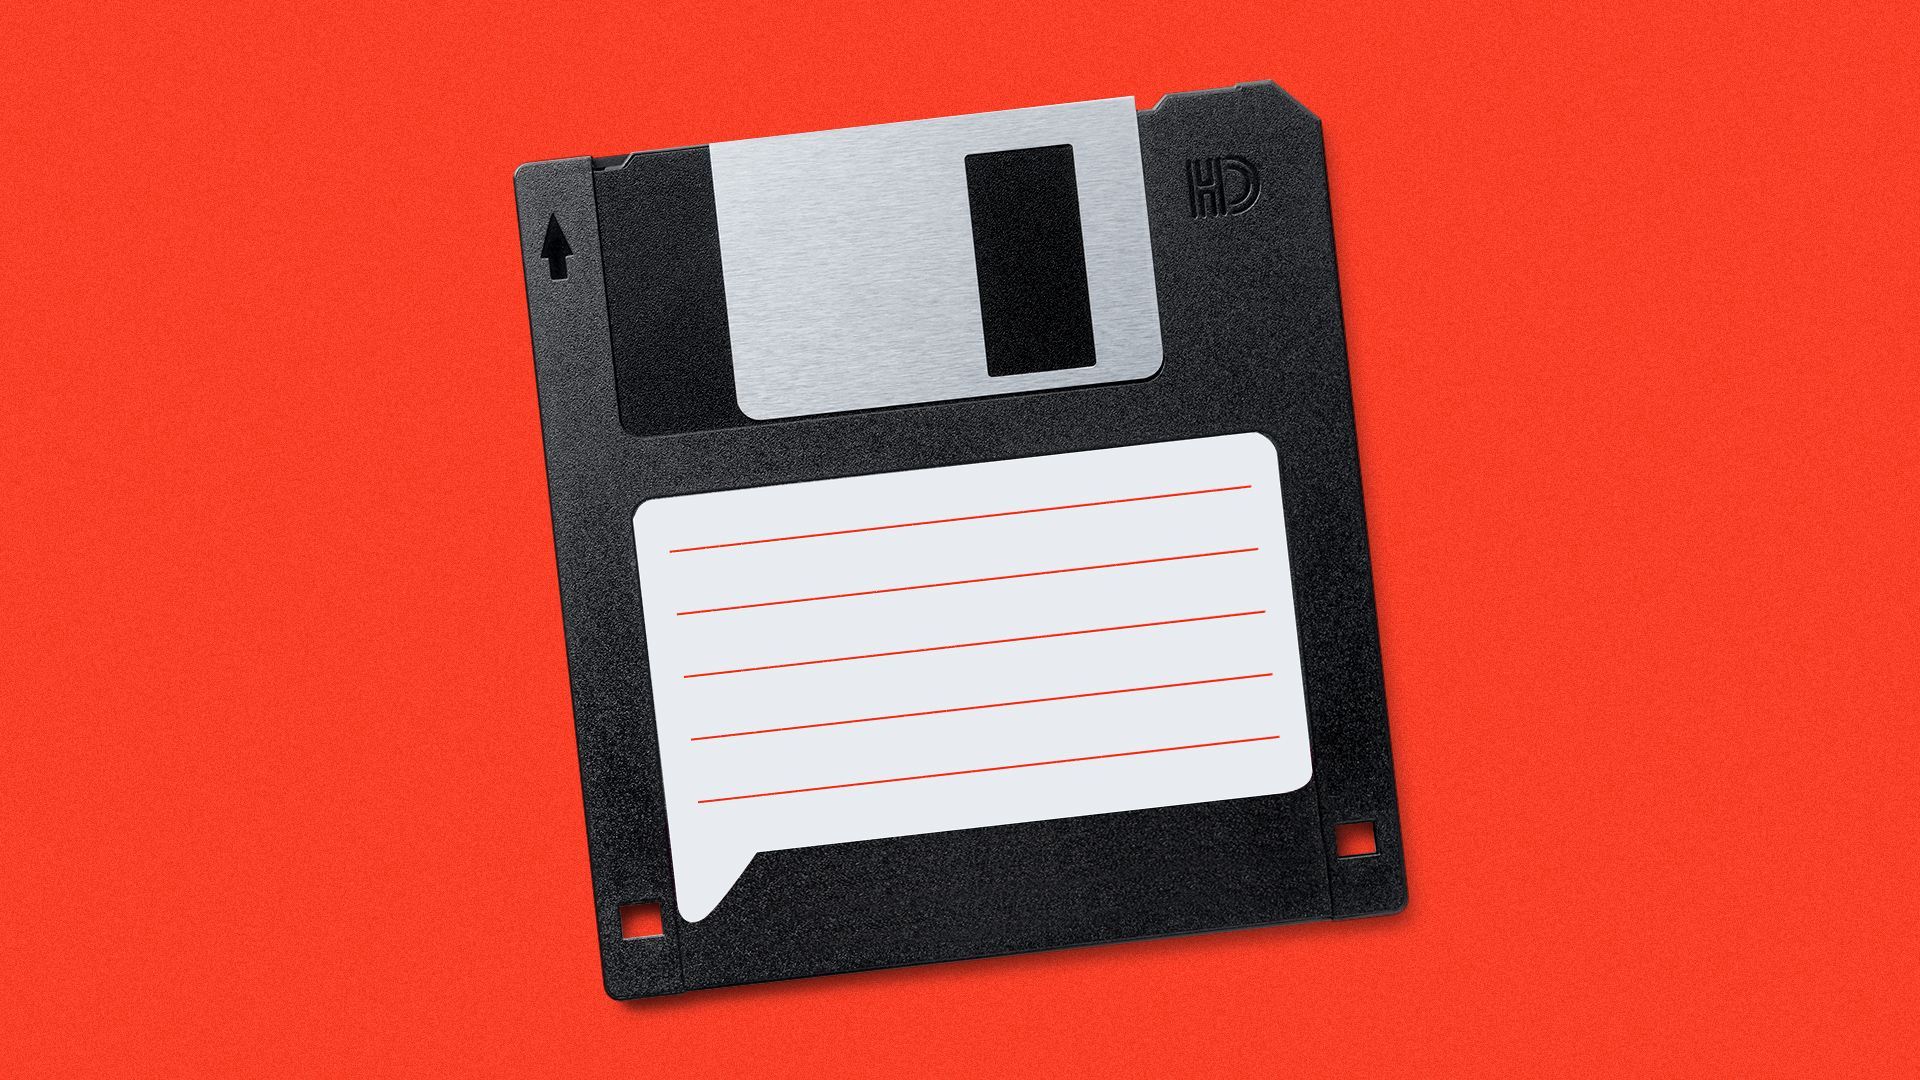 Illustration of a floppy disk with the label in the shape of a speech bubble. 